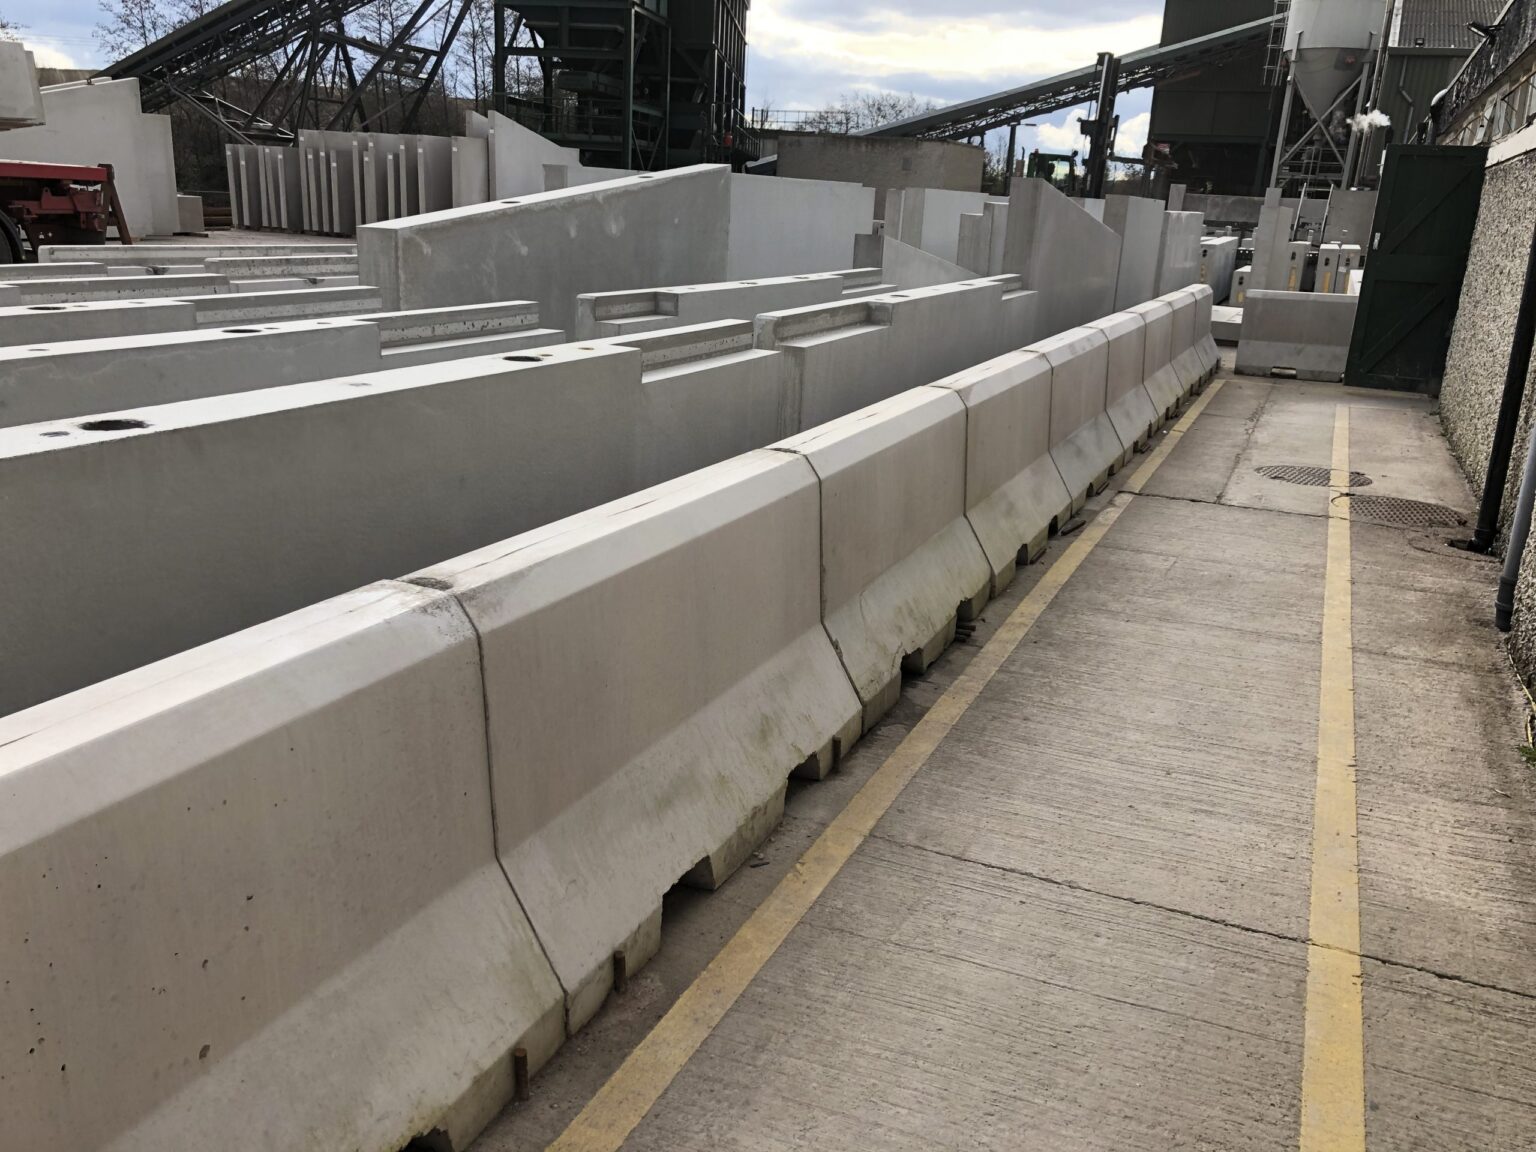 Genius Ways to Use Concrete Barriers and Retaining Walls in 2022